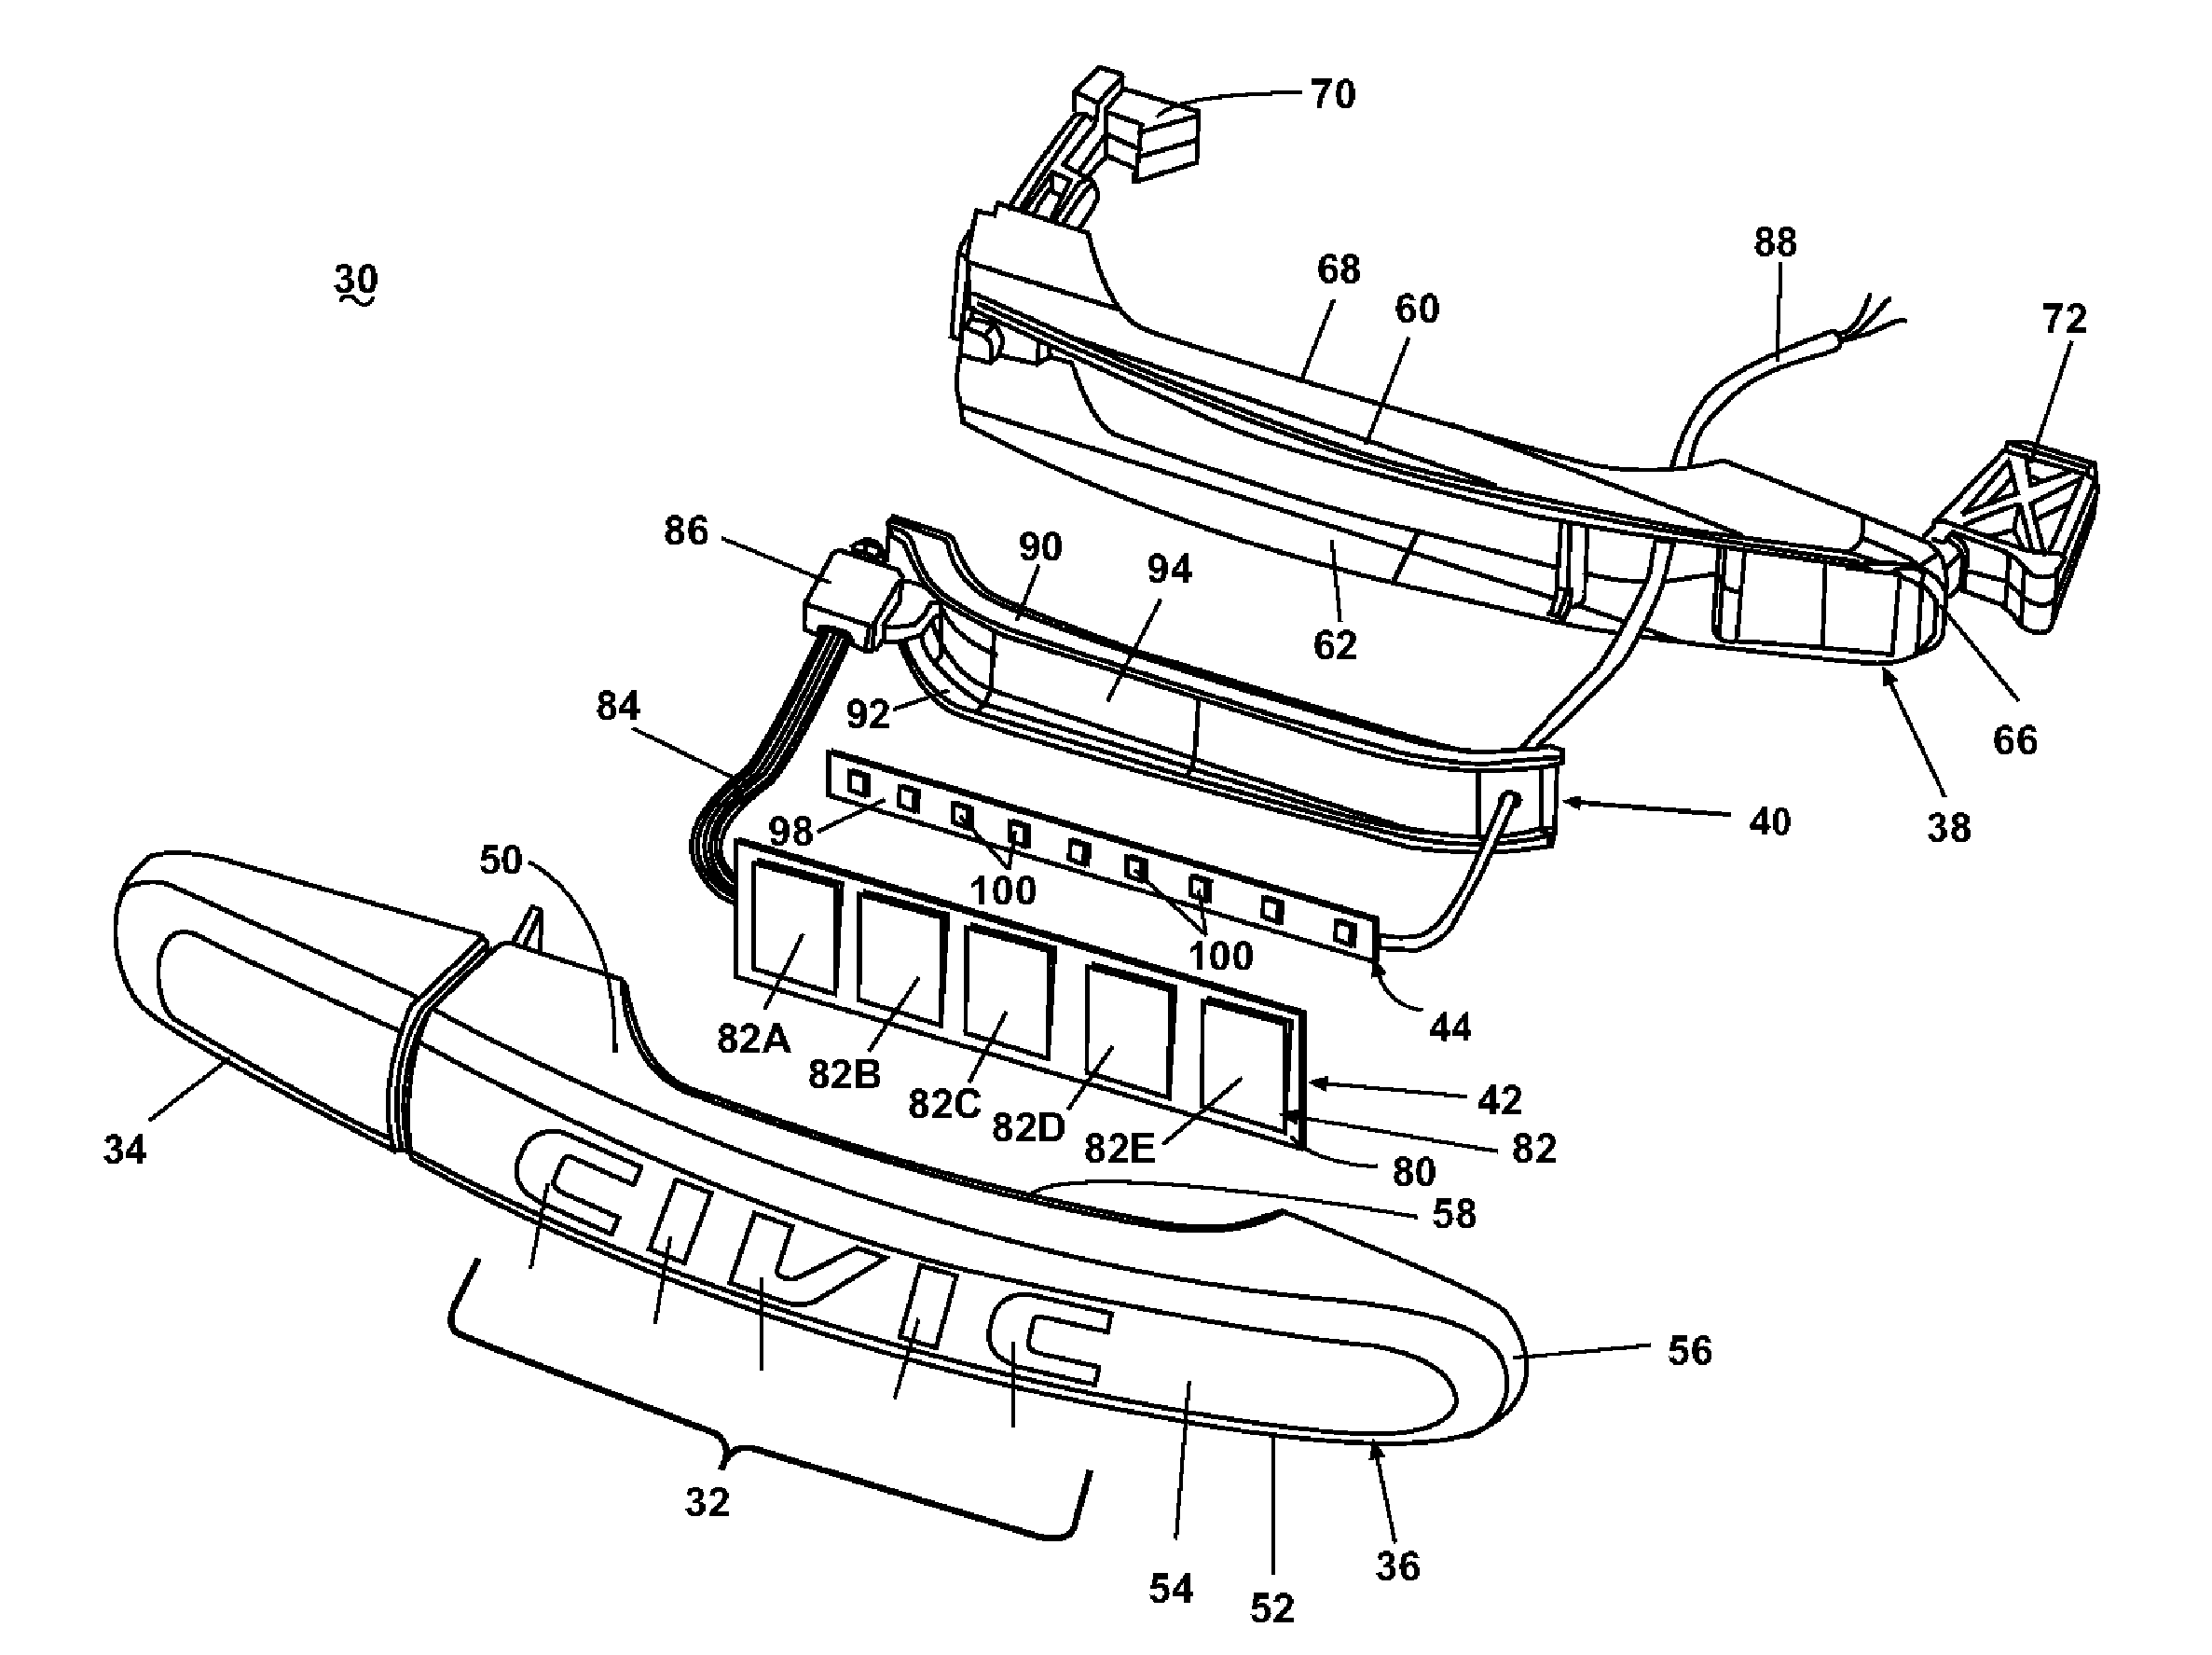 Vehicular keyless entry system incorporating textual representation of the vehicle or user of the vehicle